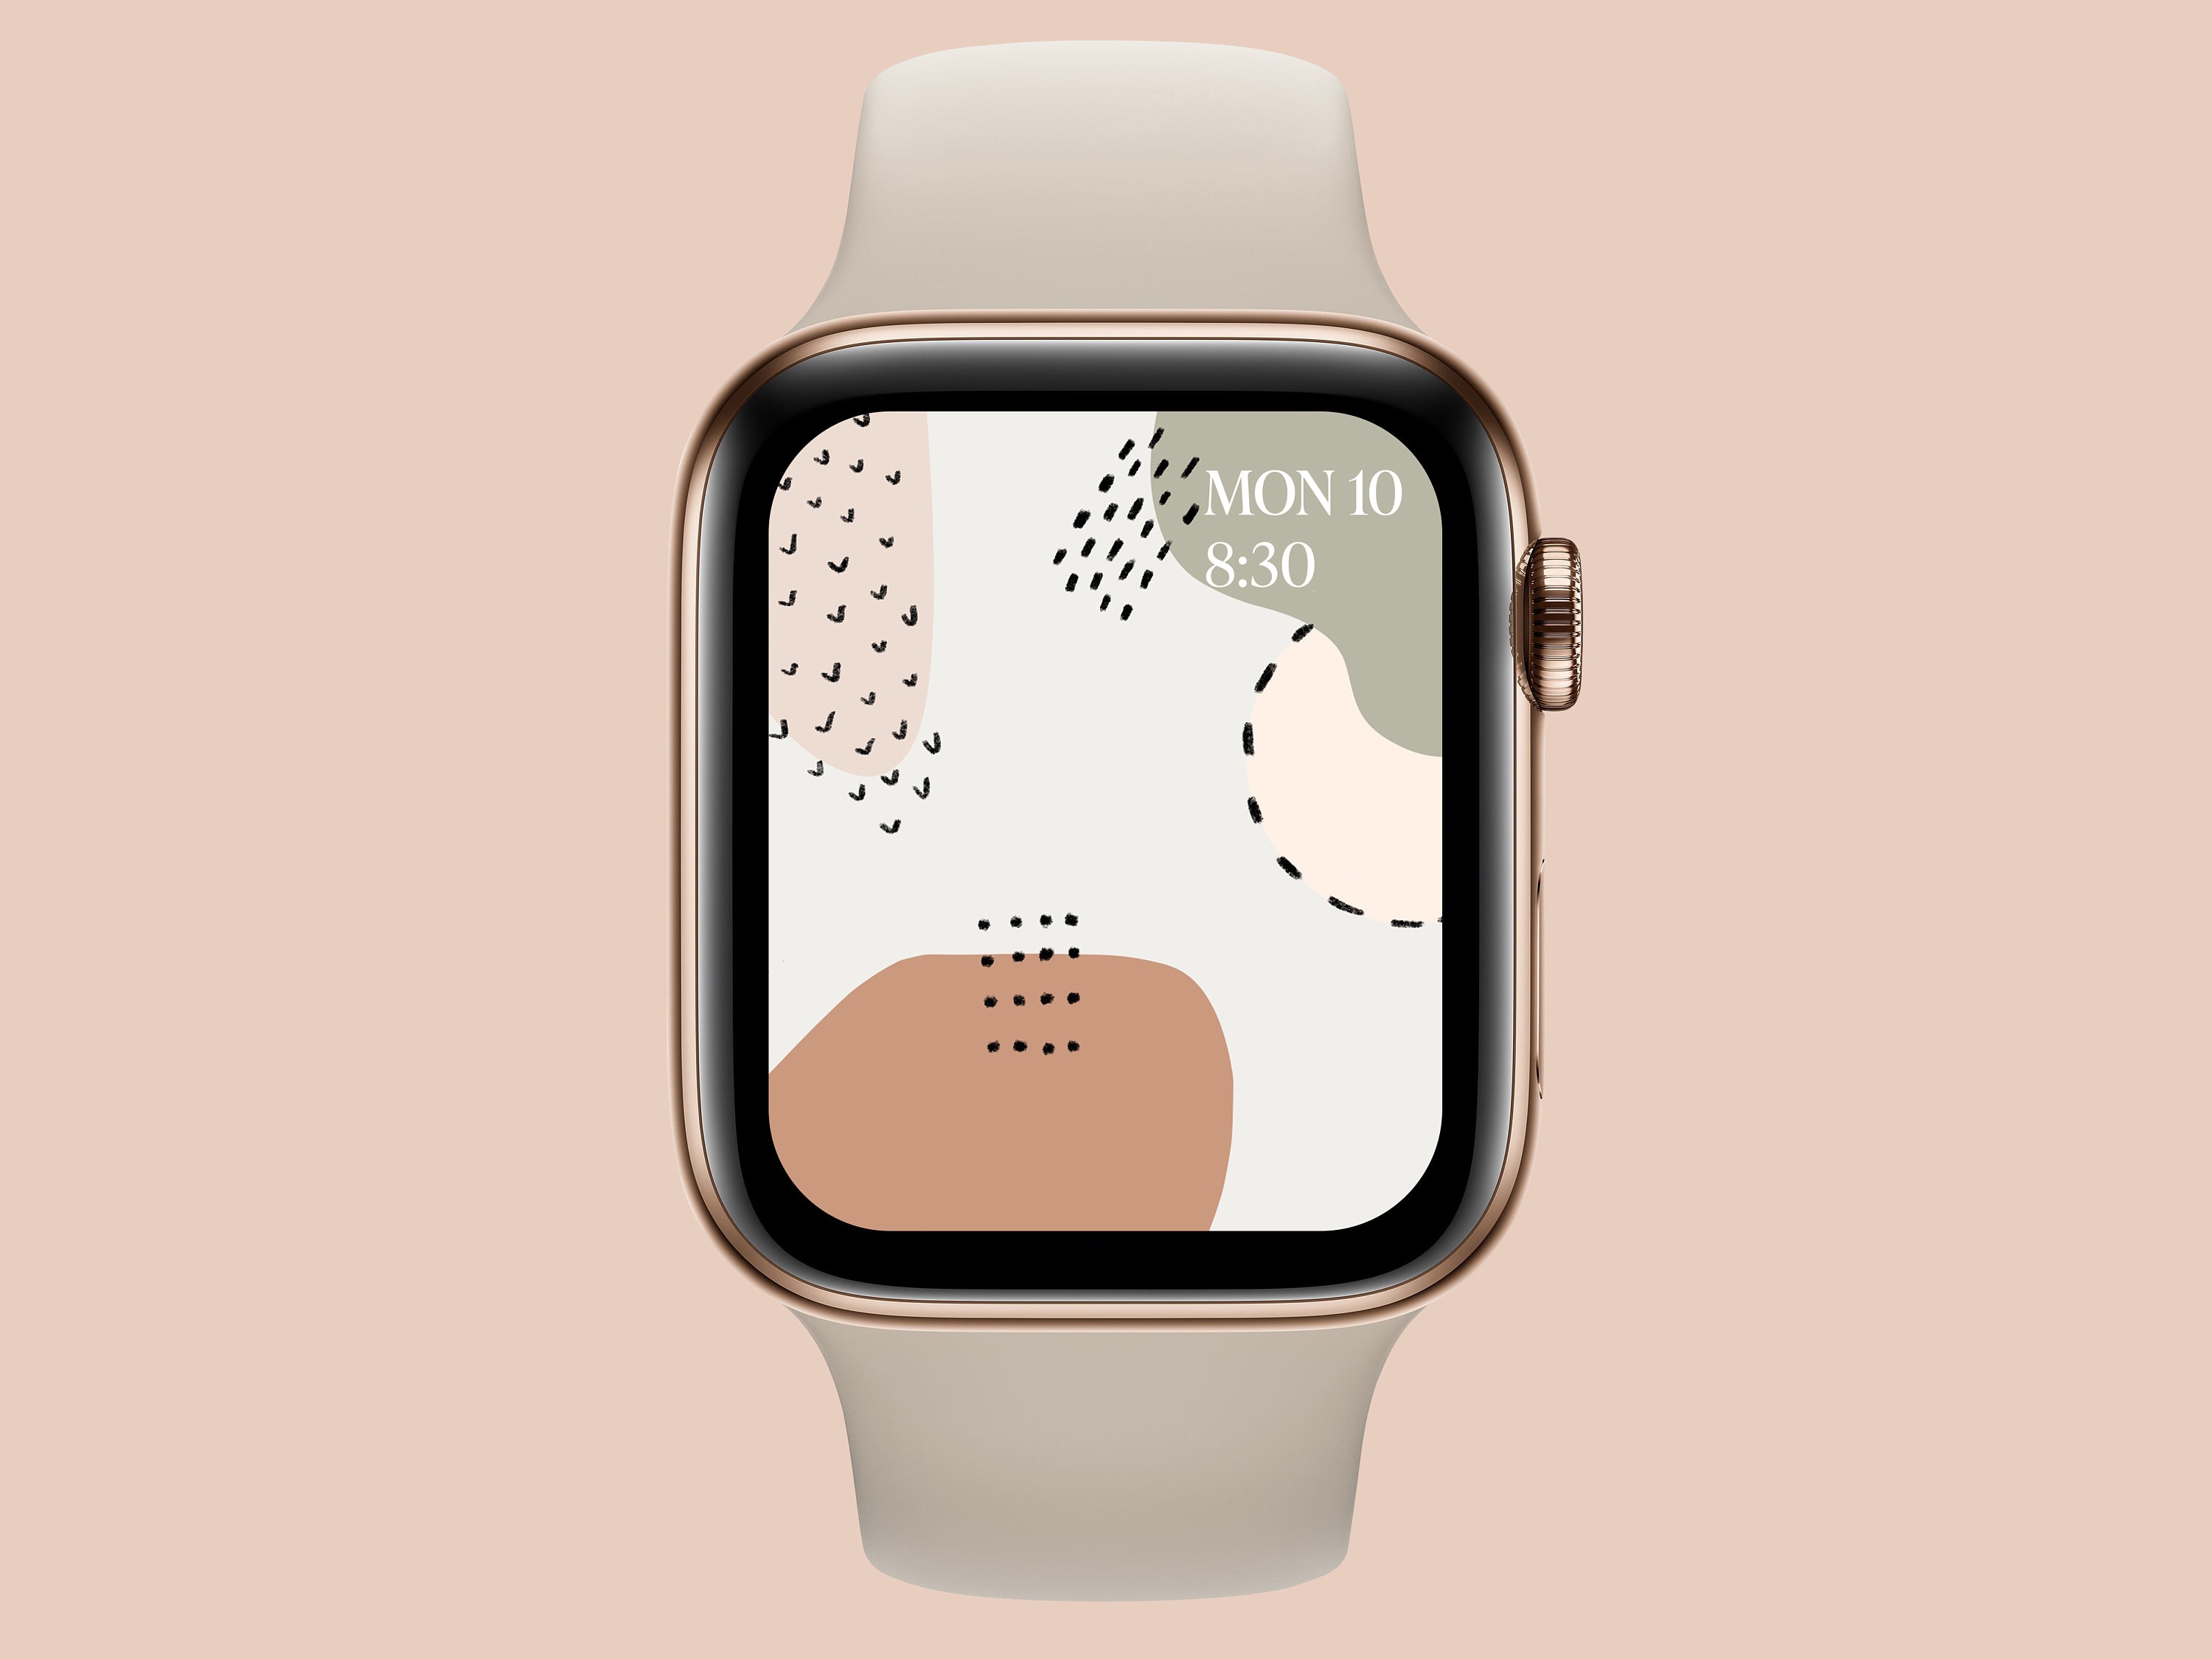 Apple Watch X-Ray Wallpaper (Free Download) by Max Burnside on Dribbble